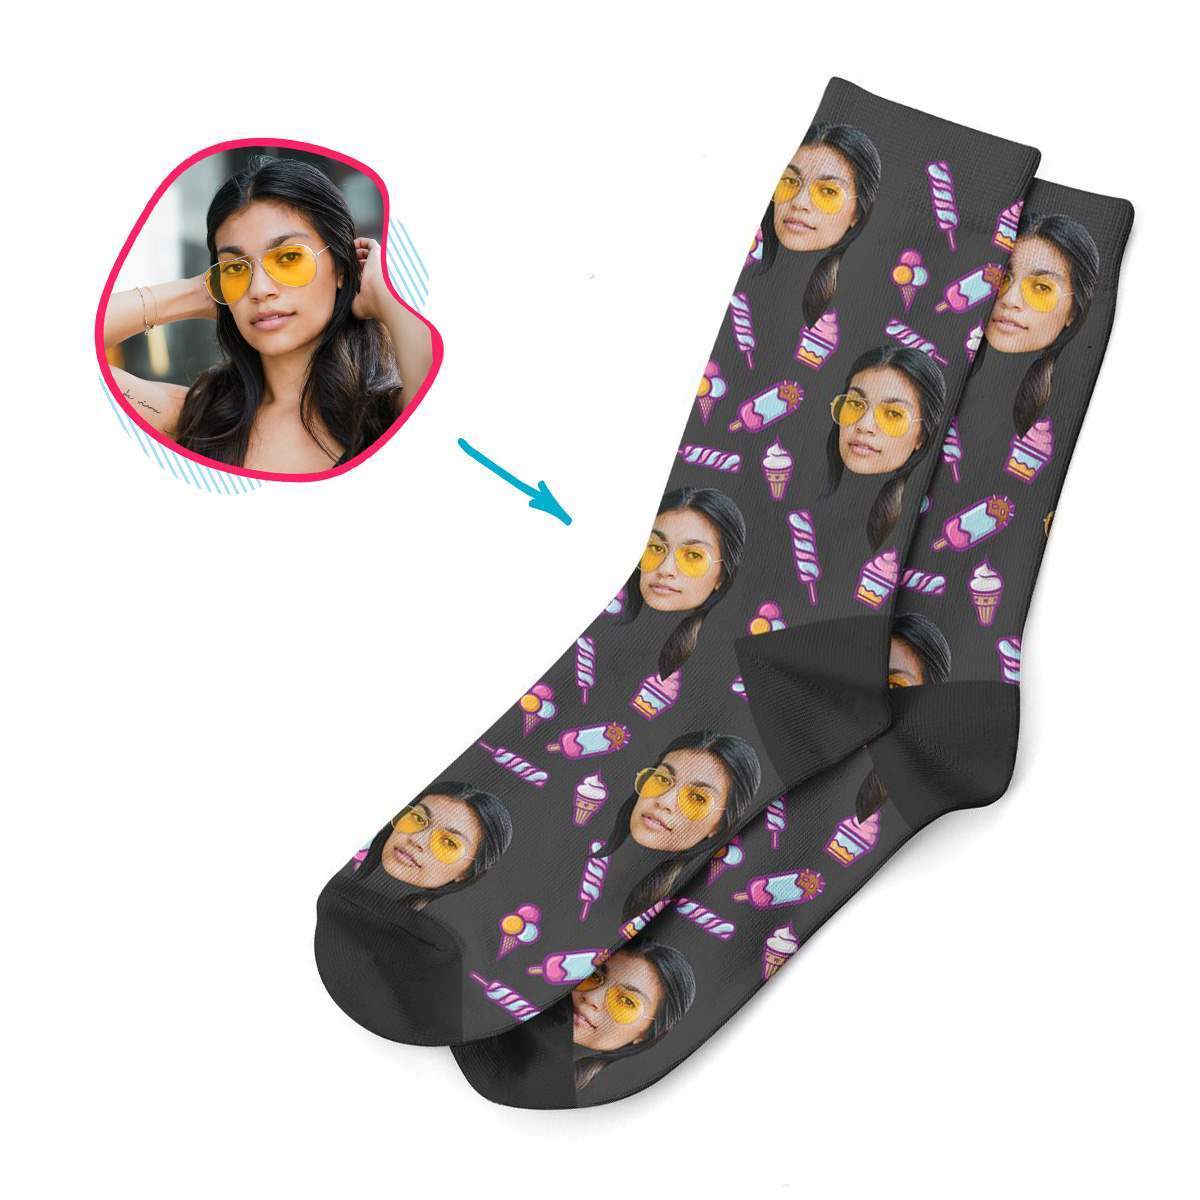 dark Candies socks personalized with photo of face printed on them